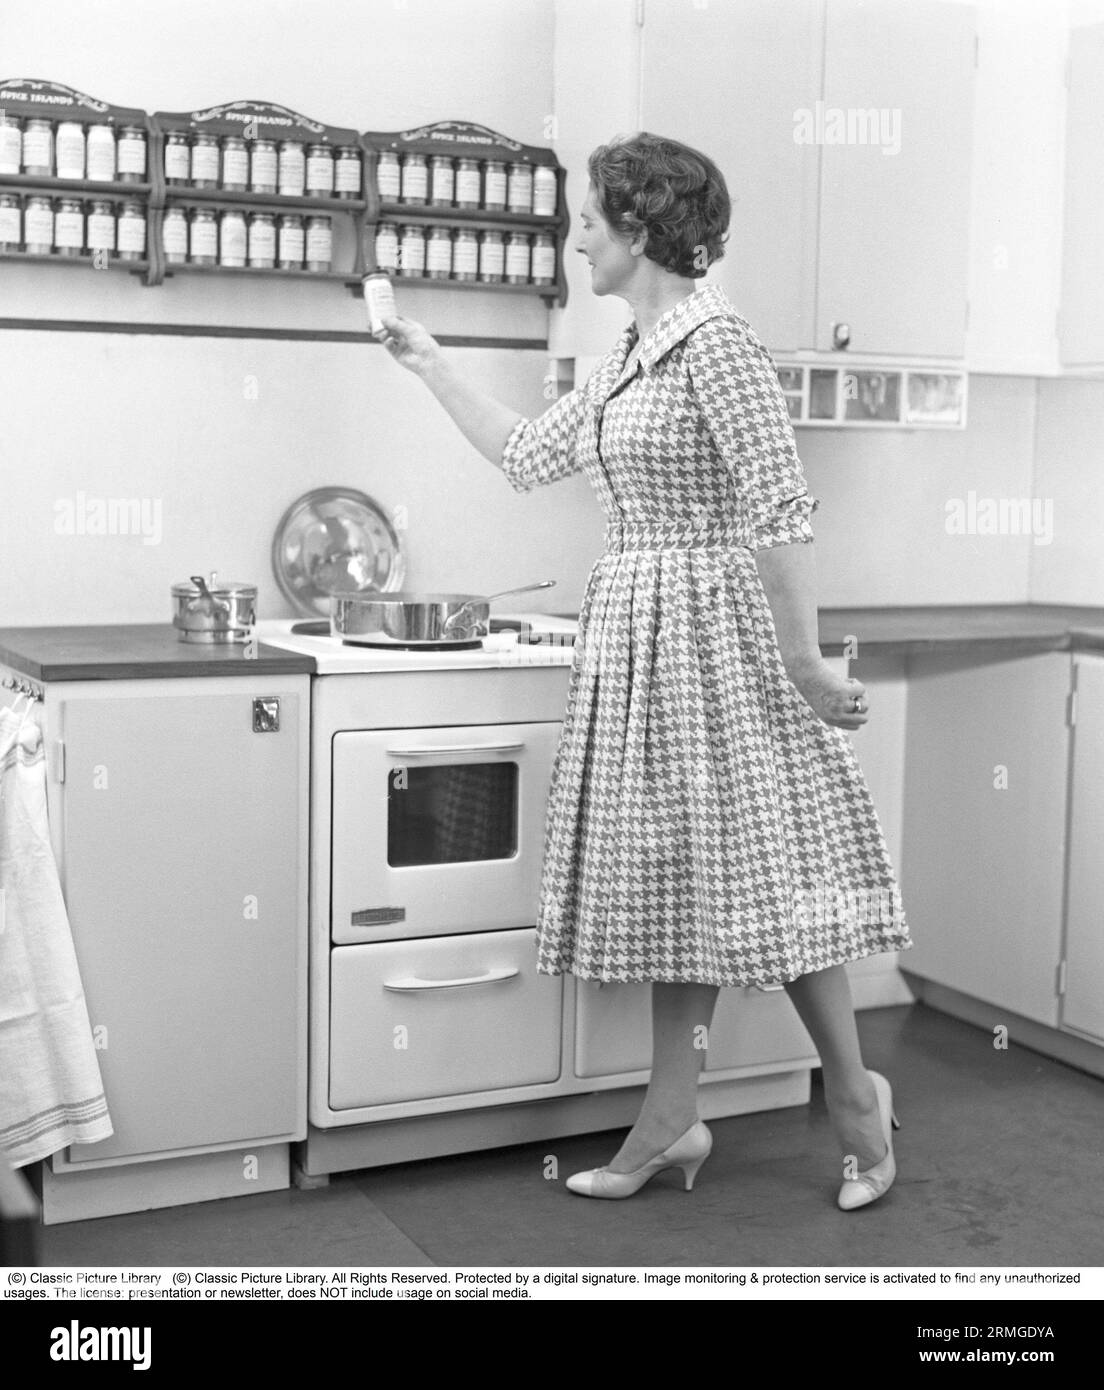 In the 1950s. A woman in a typical 1950s kitchen with wooden cabinets and a set of spices on shelfes above the cooker. She holds a can of spices in her hand and looks at it. Sweden 1959. Kristoffersson ref CE103-3 Stock Photo